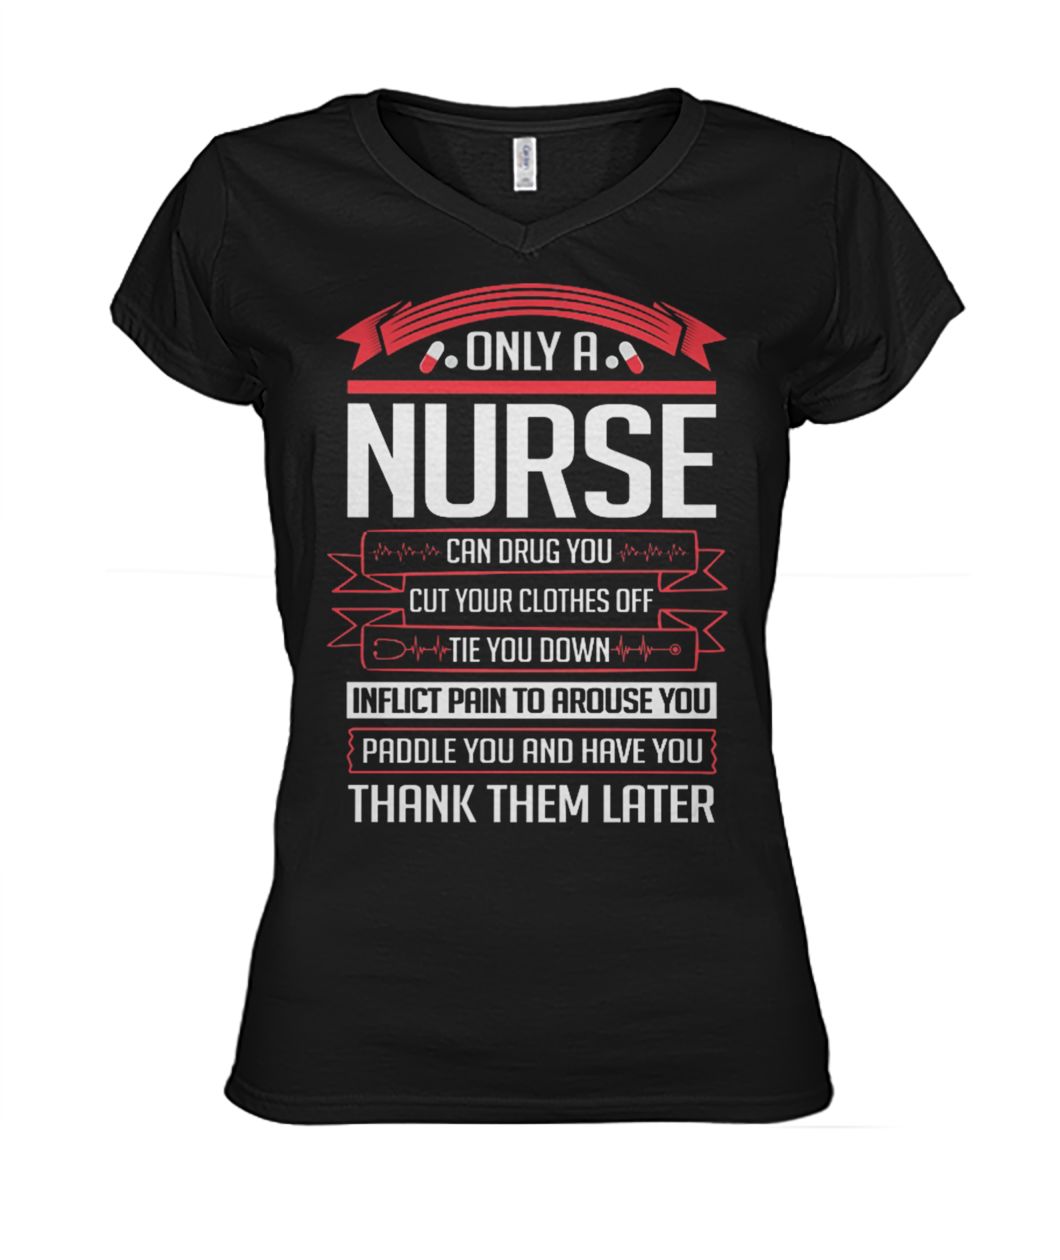 Only a nurse can drug you cut your clothes off tie you down women's v-neck